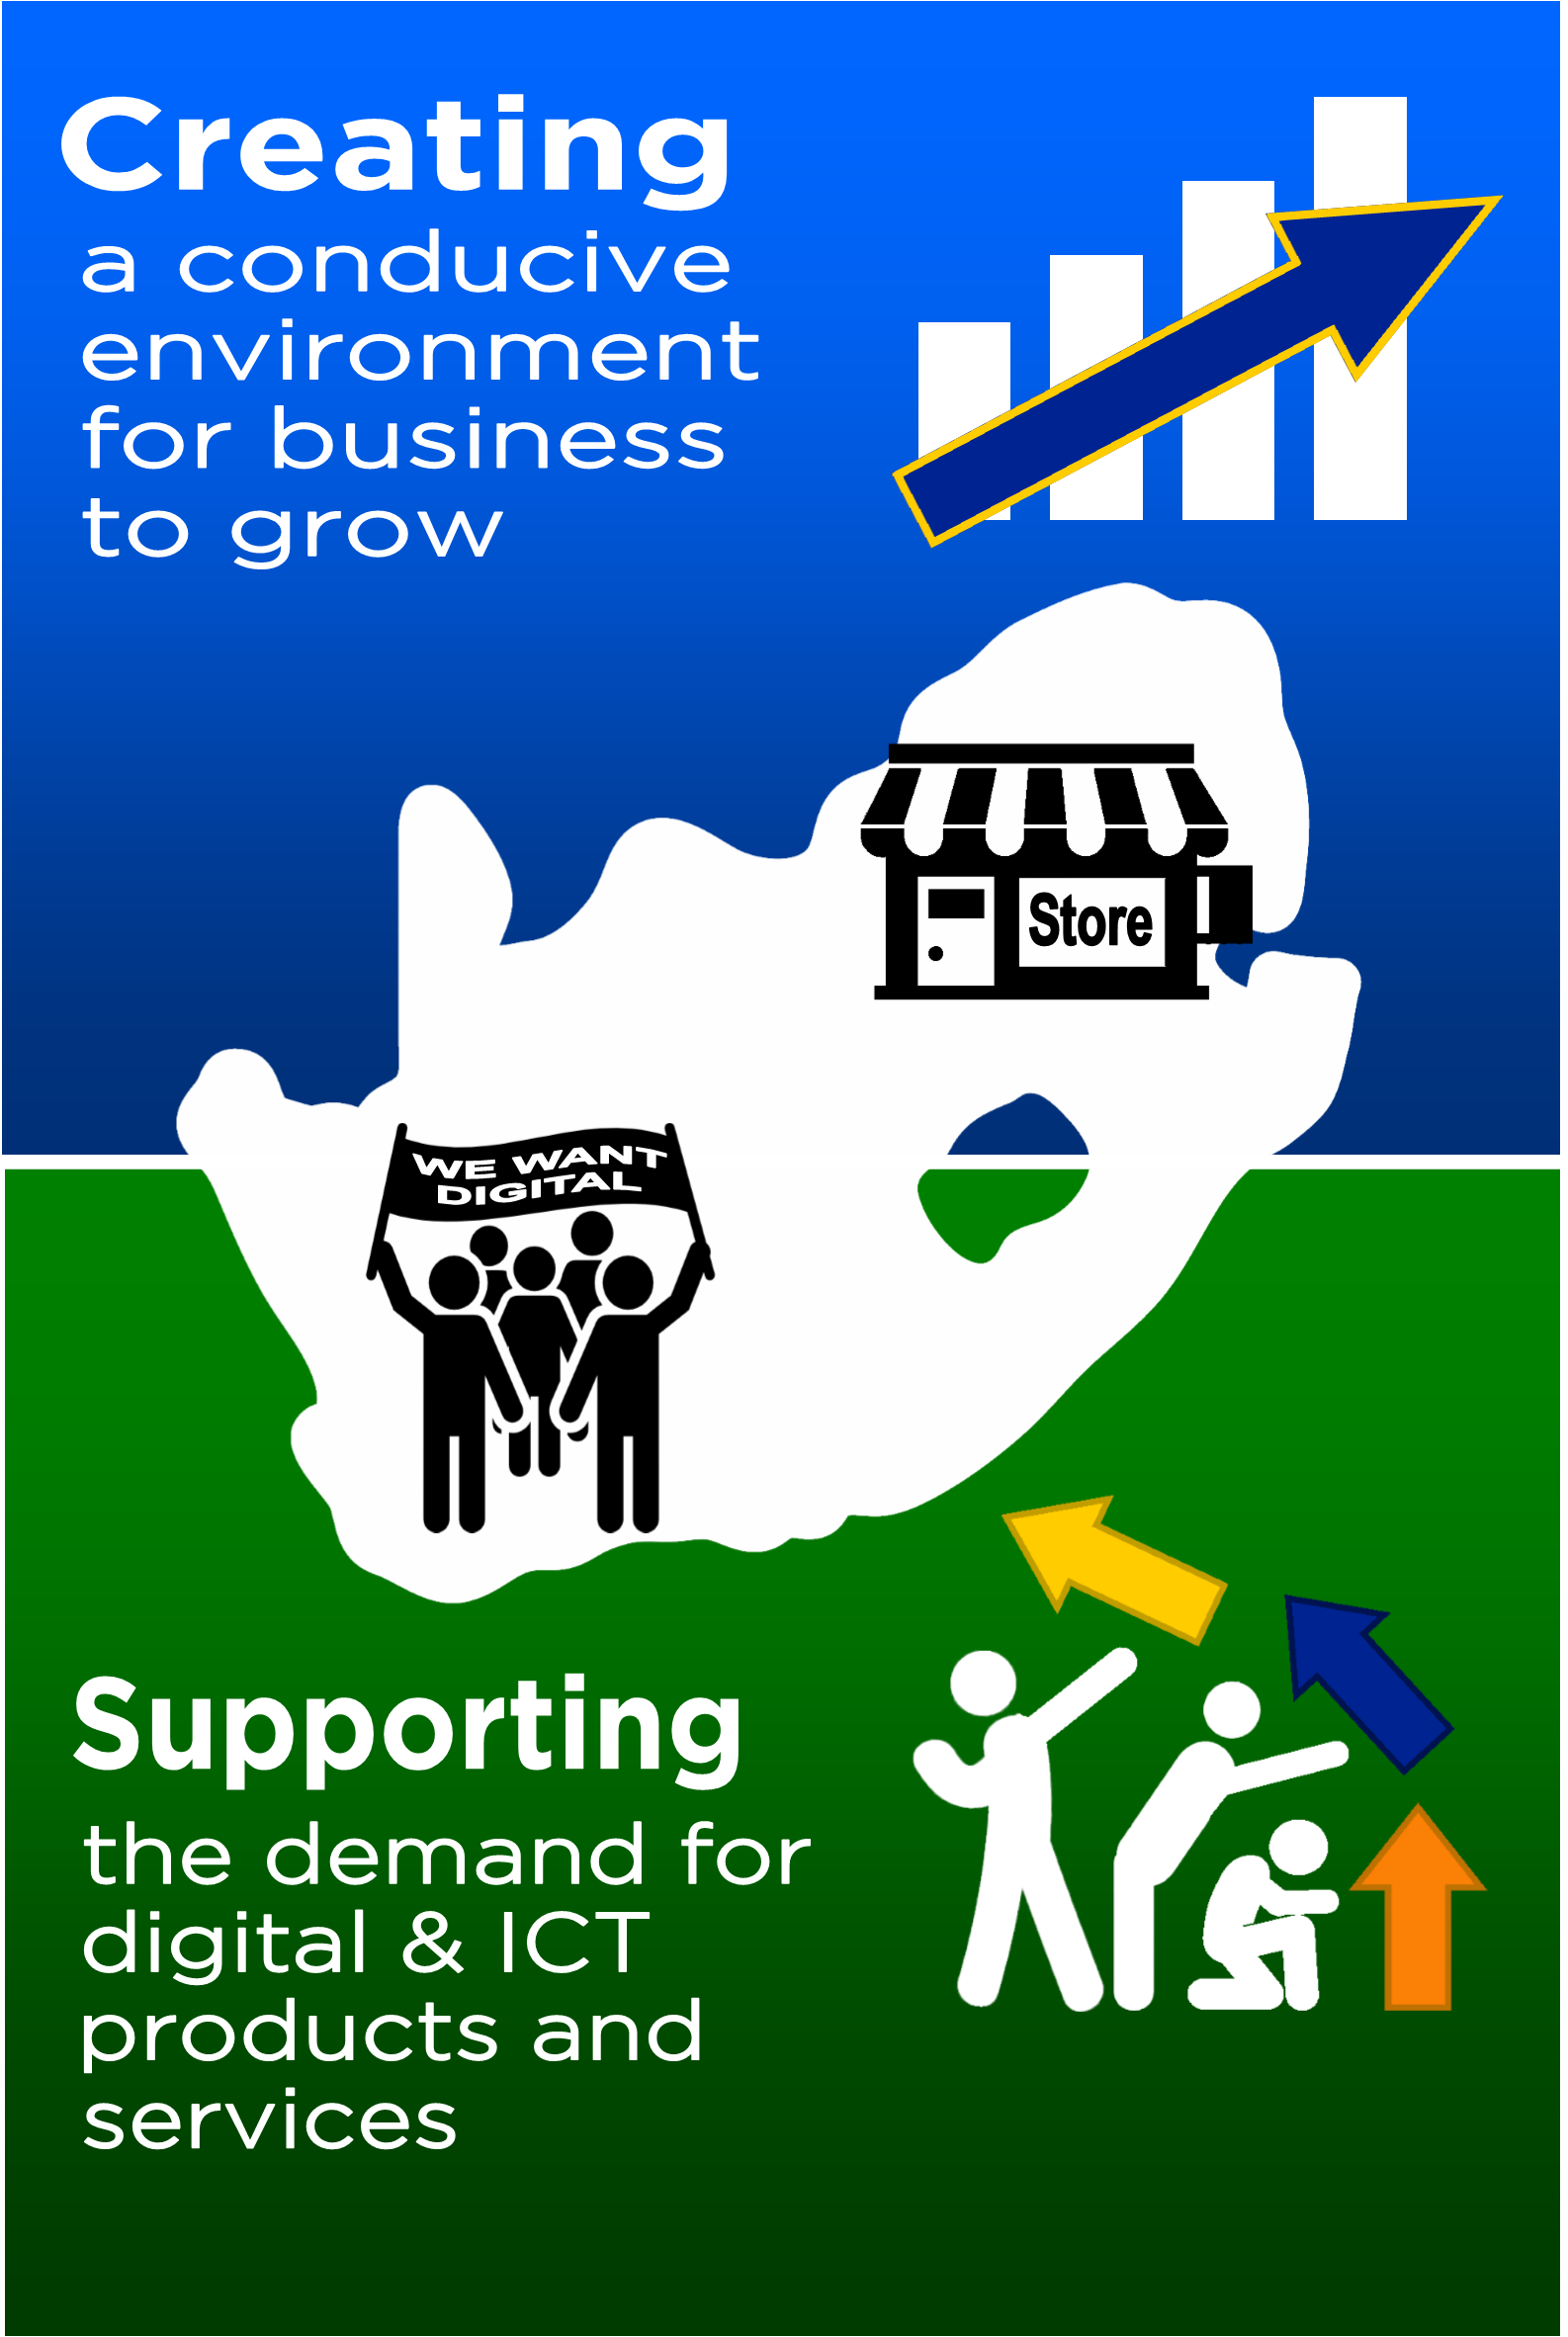 Picture illustrating the Western Cape government aims to create an conducive environment for business to grow and aims to support the for digital and ICT products and services